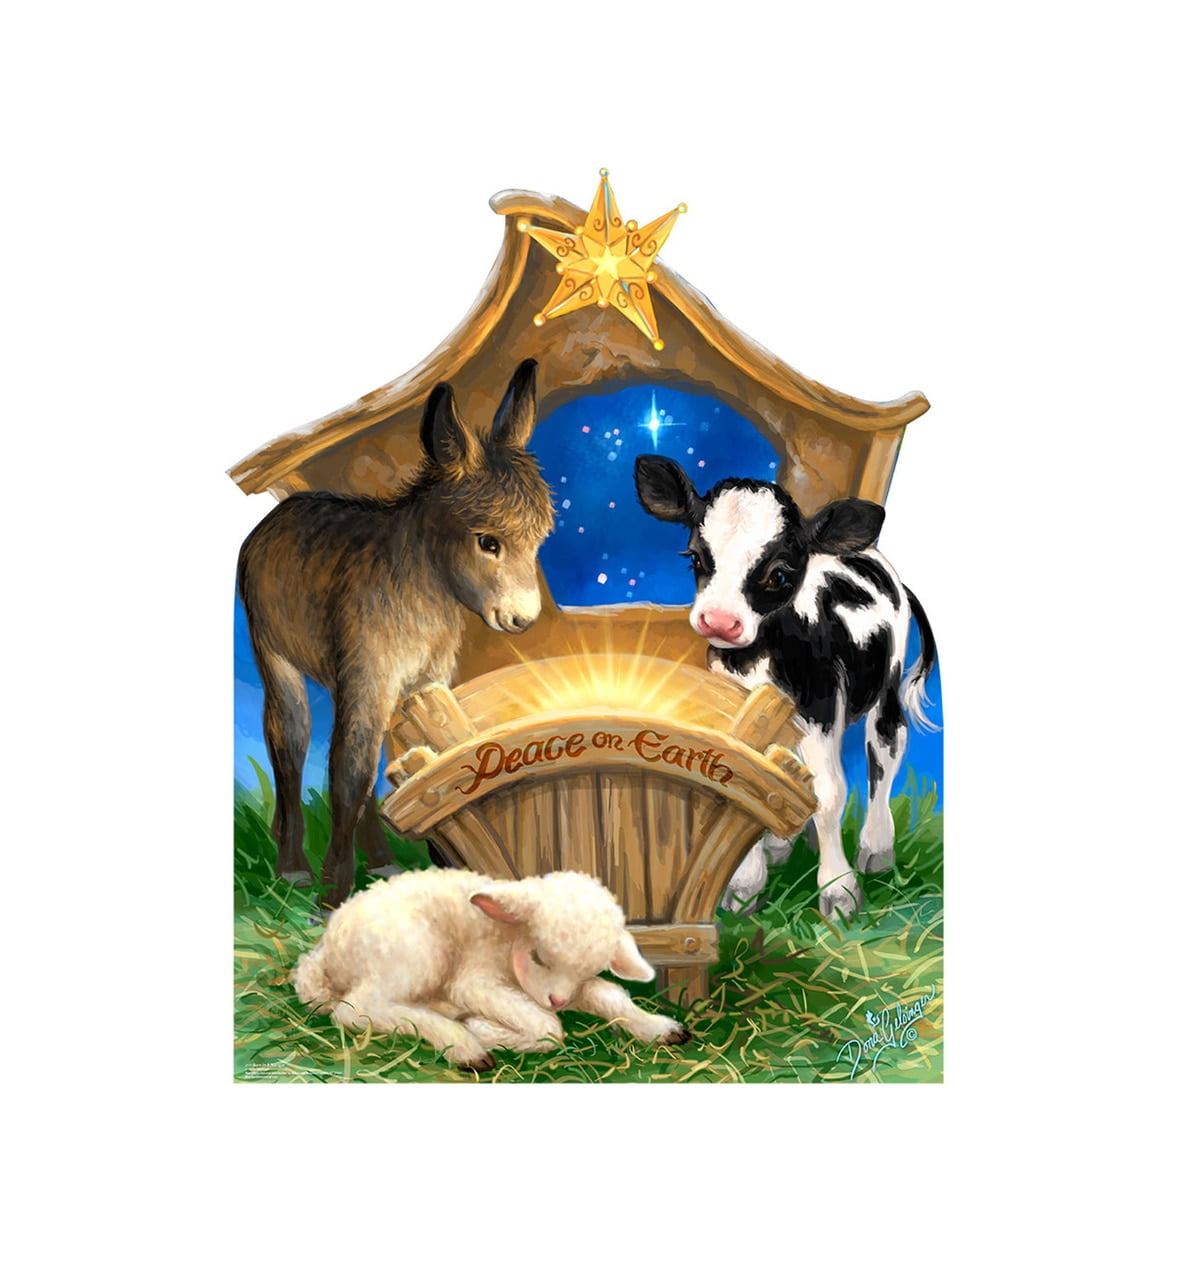 Picture of Advanced Graphics 2111 48 x 37 in. Born in a Manger - Dona Gelsinger Art Cardboard Standup